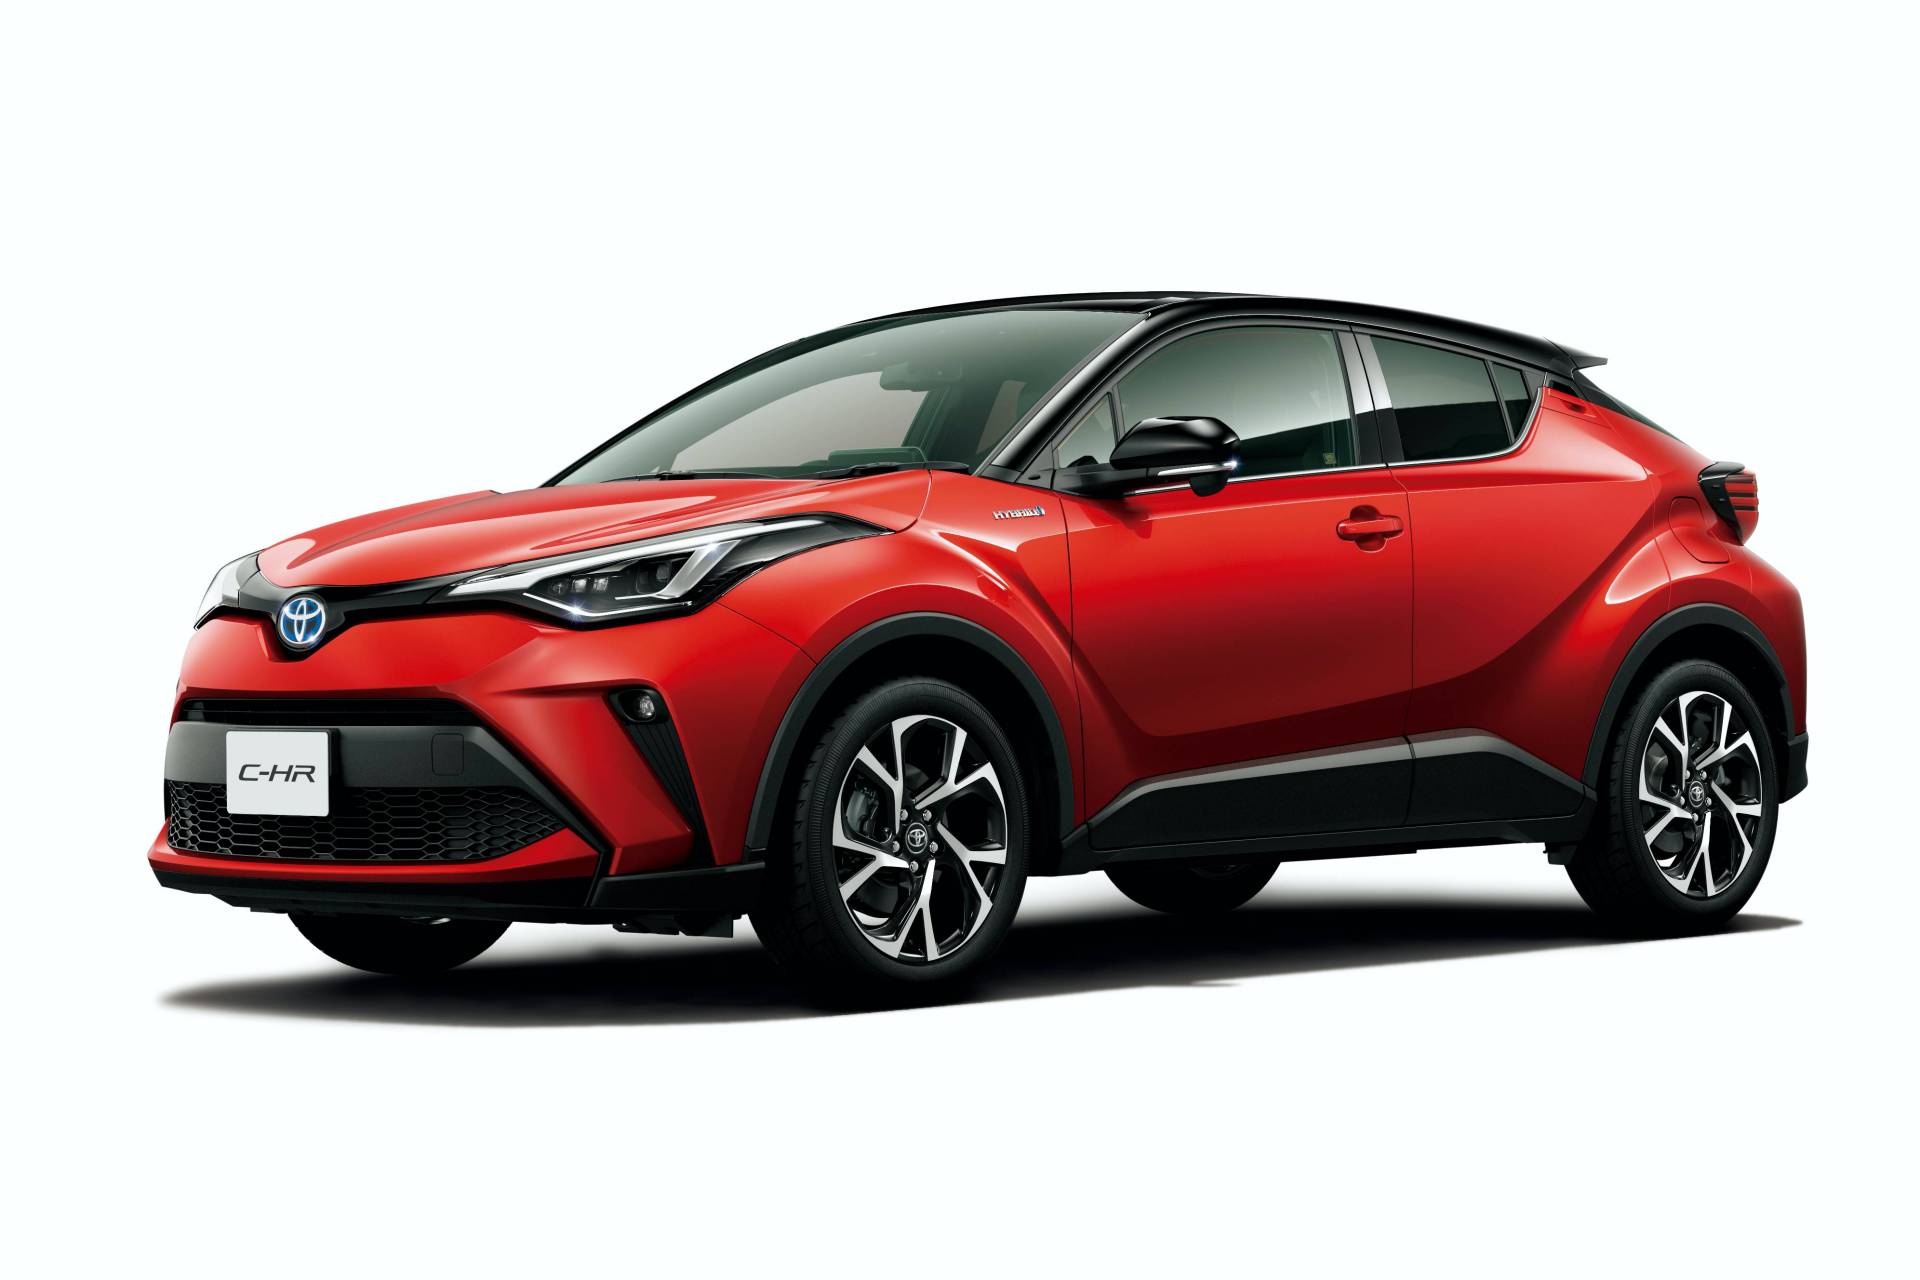 Facelifted Toyota CHR Receives Gazoo Racing Goodies In